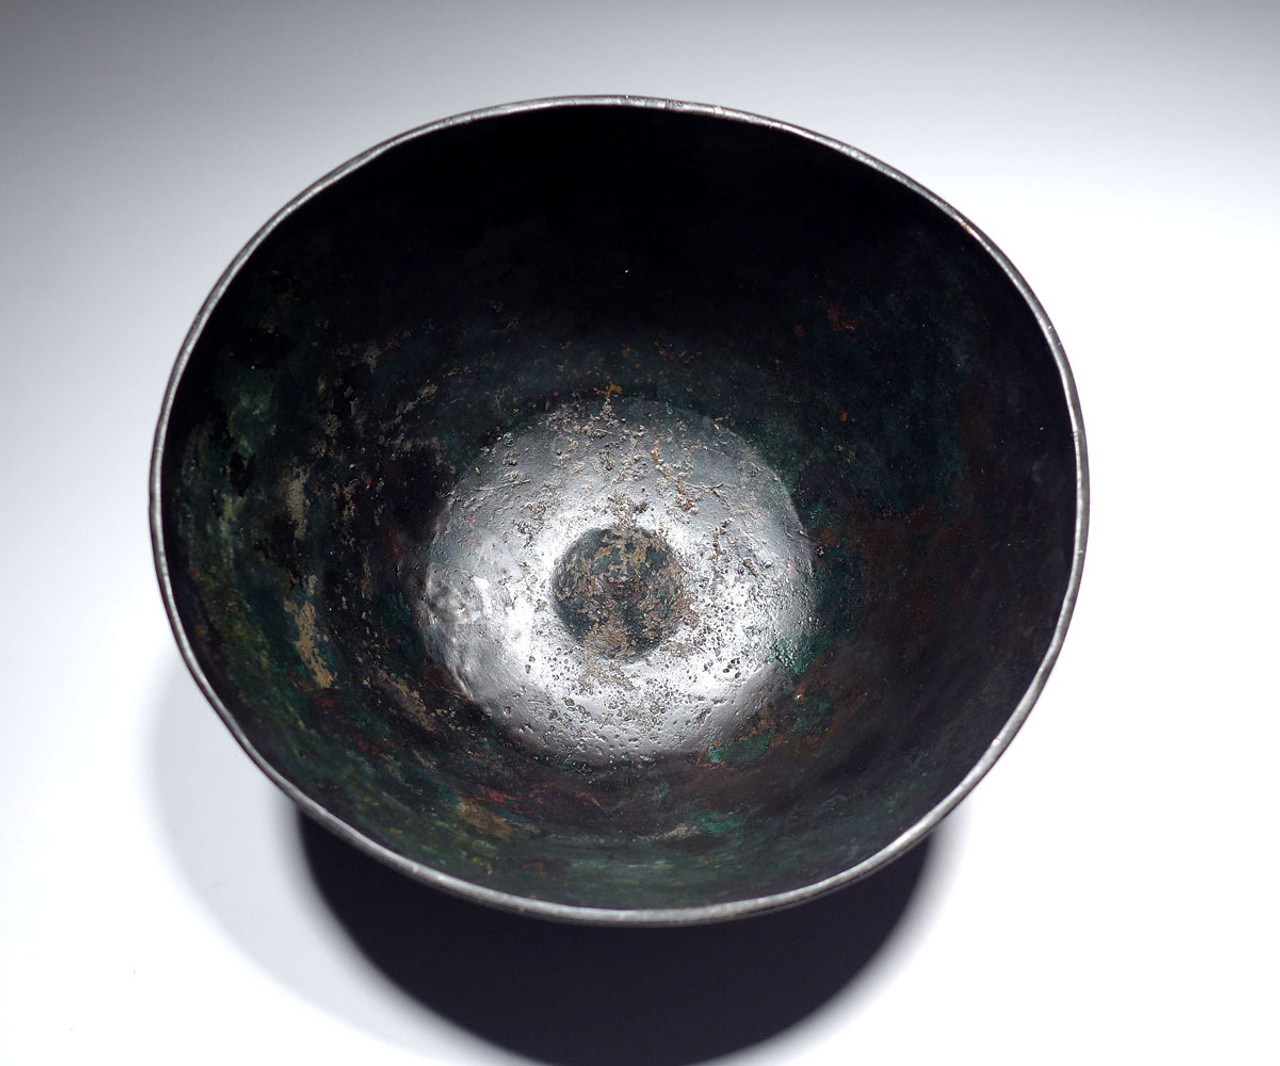 FINEST ANCIENT HAMMERED OFFERING BRONZE BOWL OF THE NEAR EASTERN LURISTAN CULTURE  *LUR220